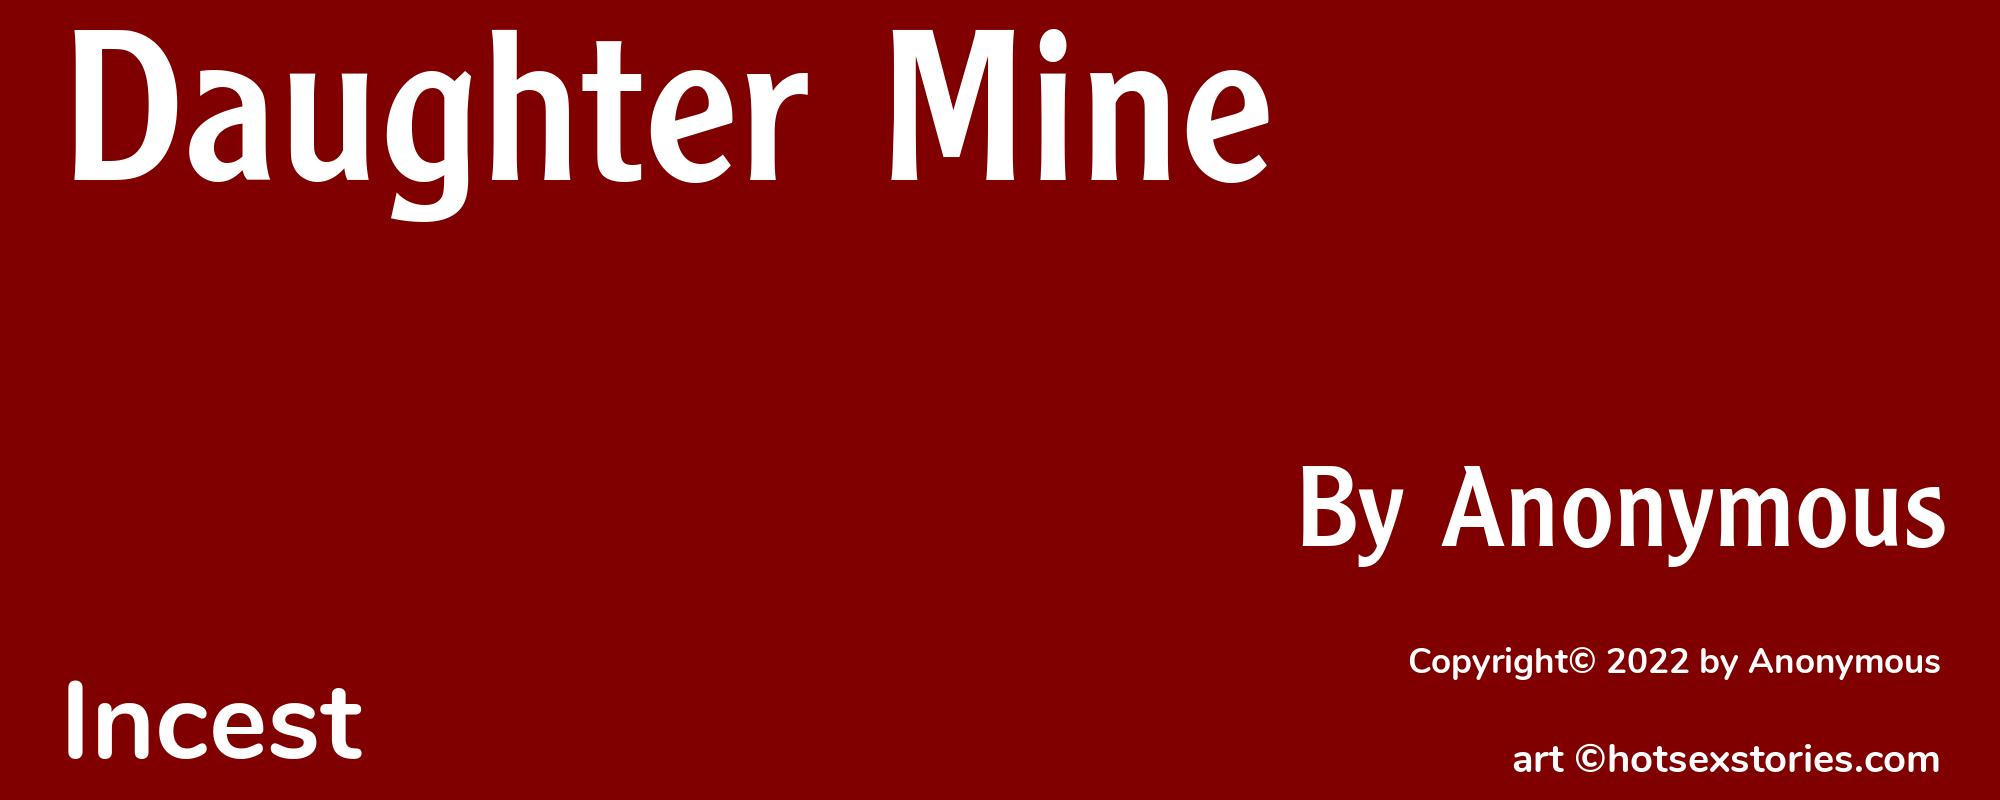 Daughter Mine - Cover